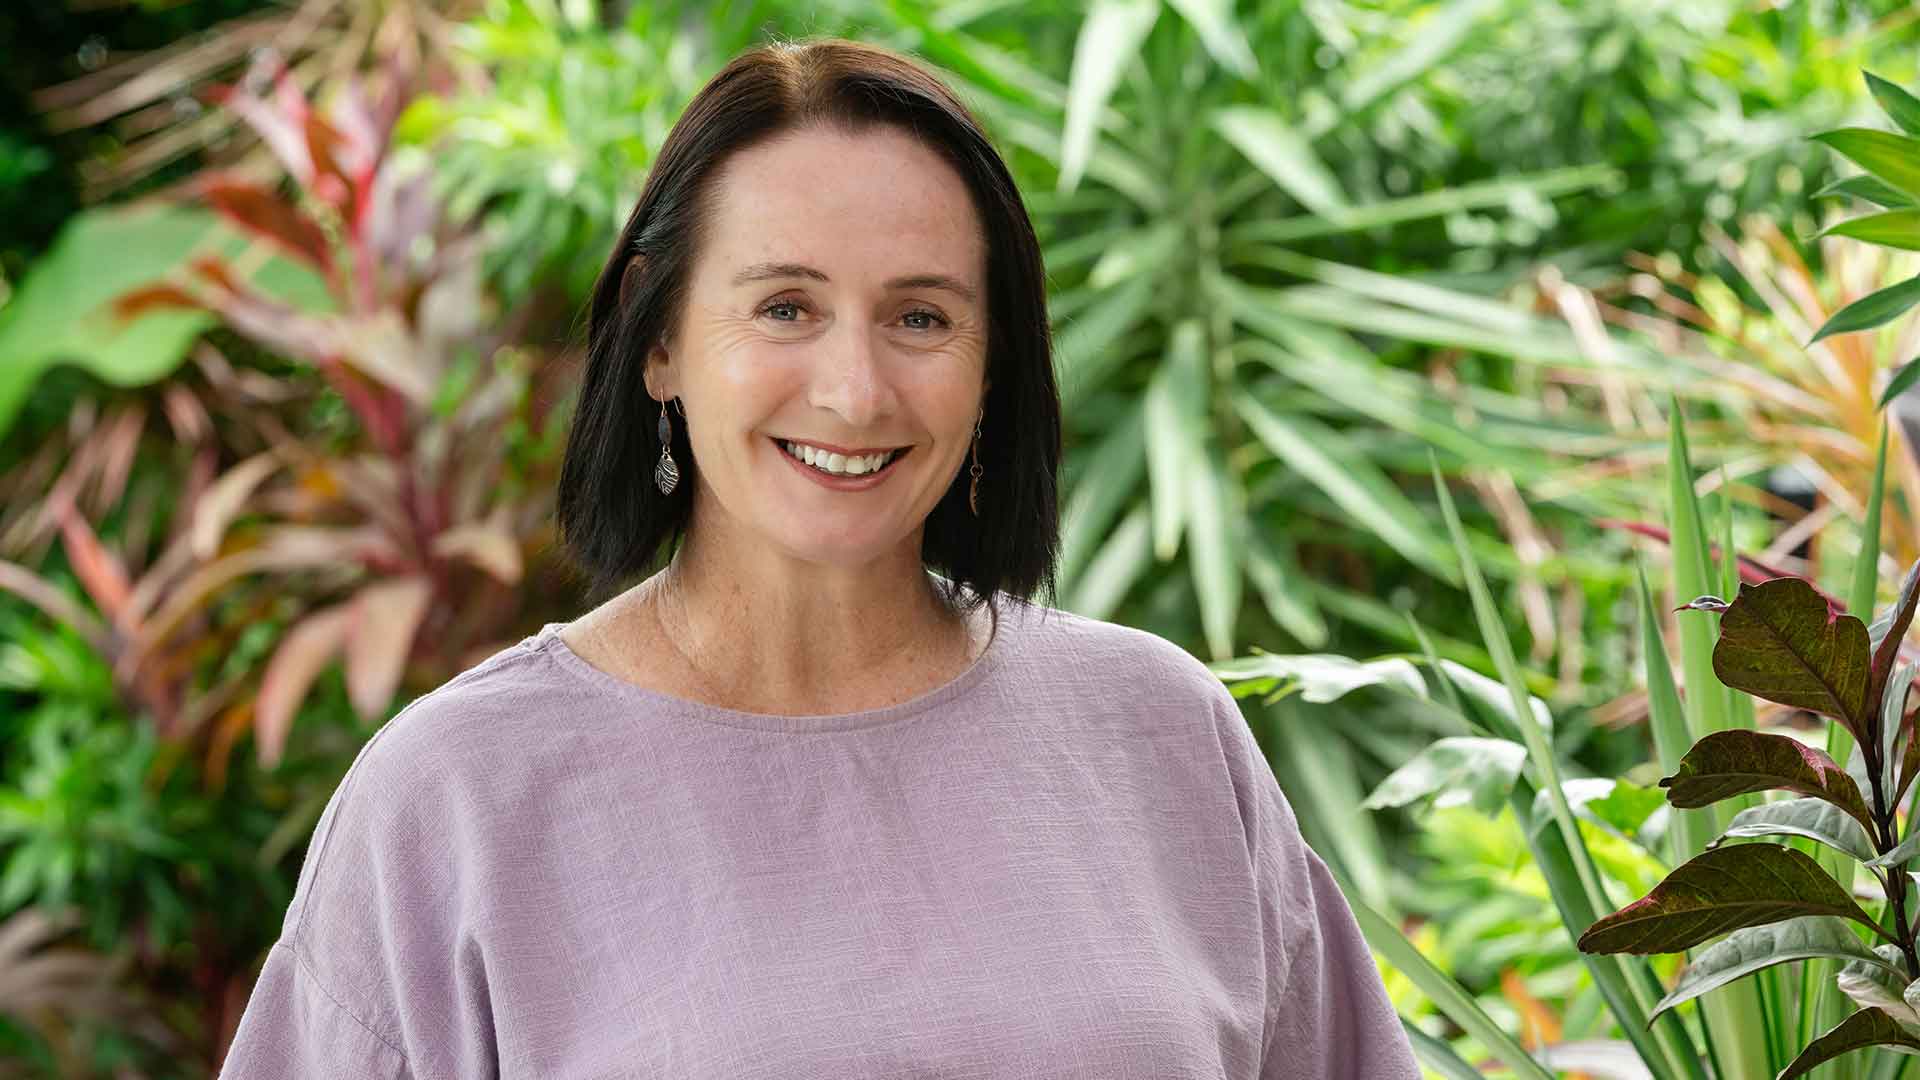 Photo of Laurie Zio, a white woman with straight dark hair, wearing a pale purple blouse. There is tropical greenery in the background.